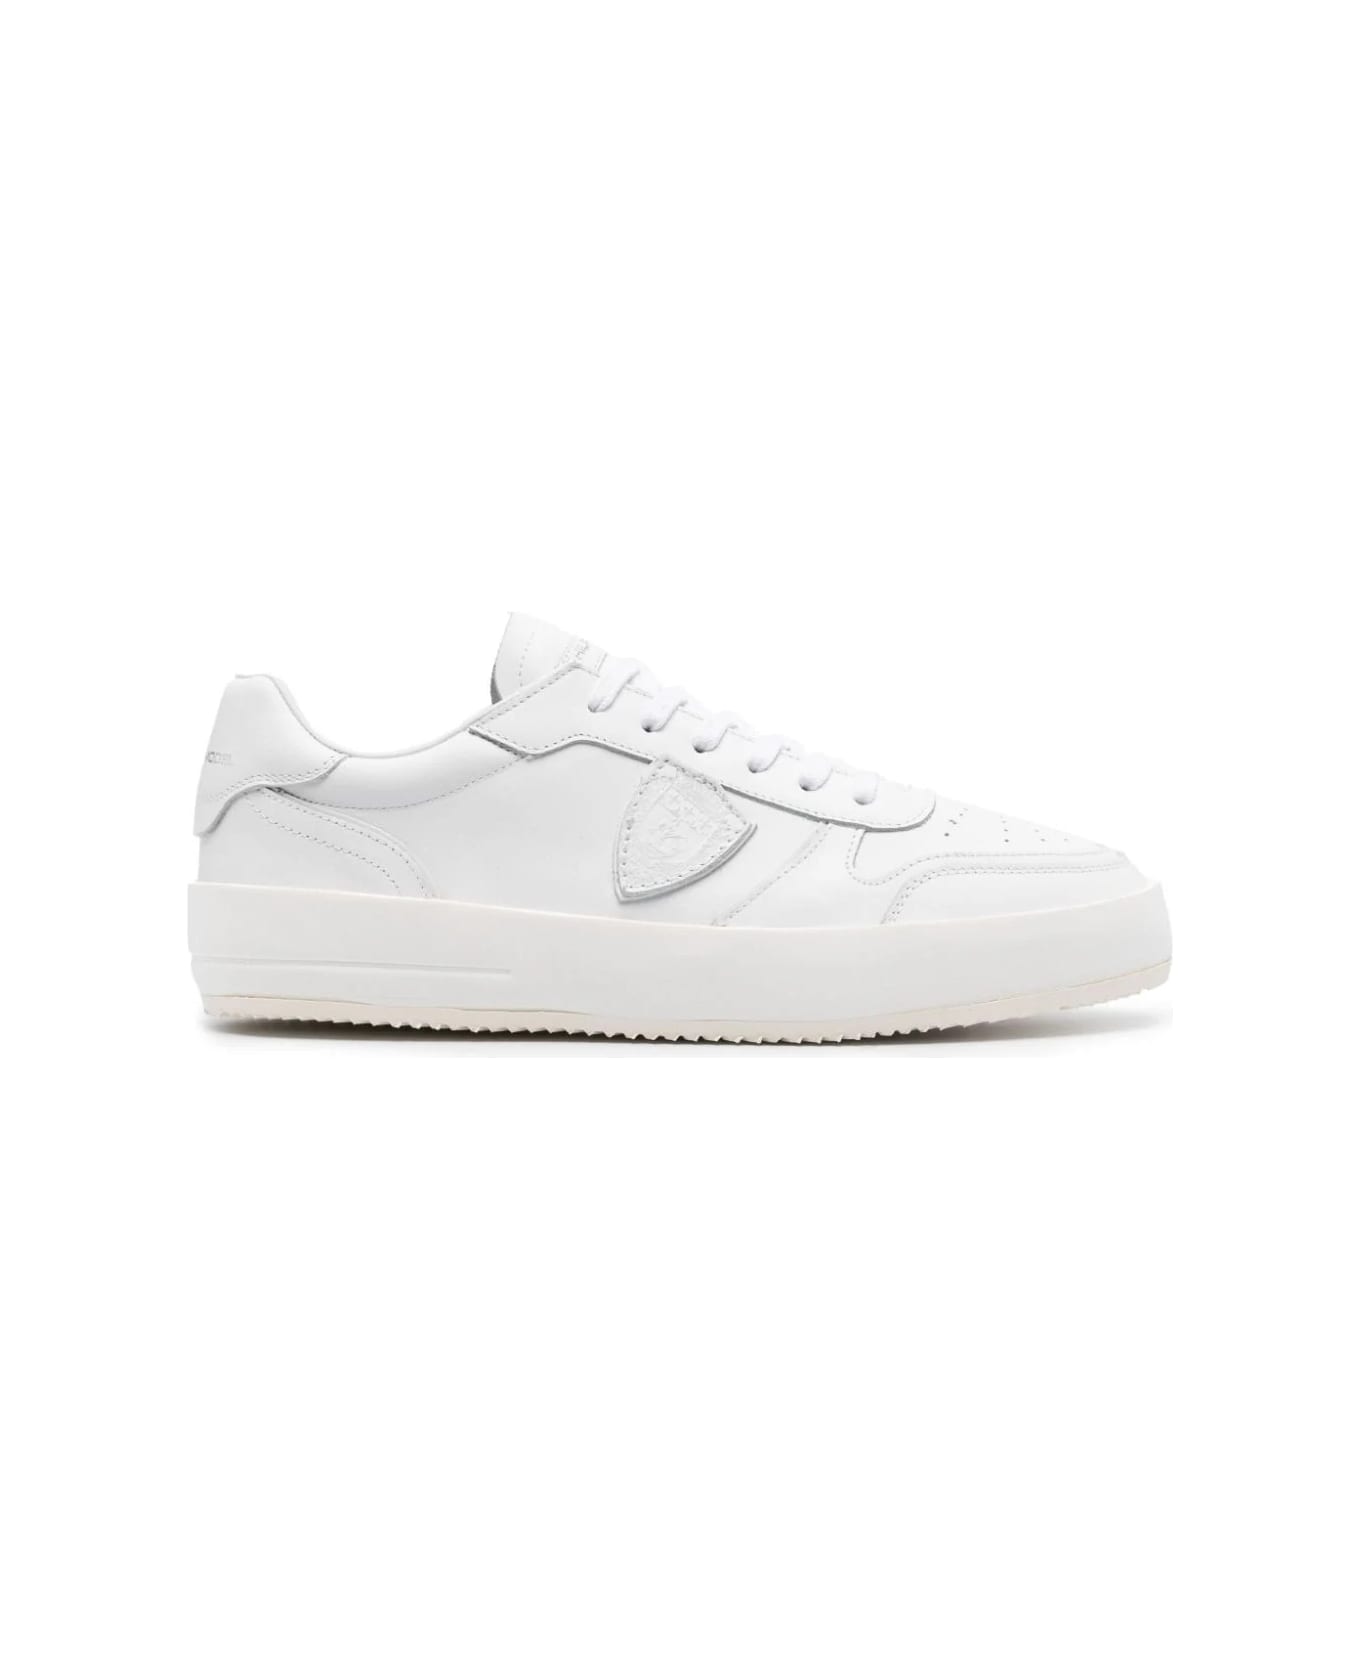 Philippe Model Nice Low Sneakers - White - White